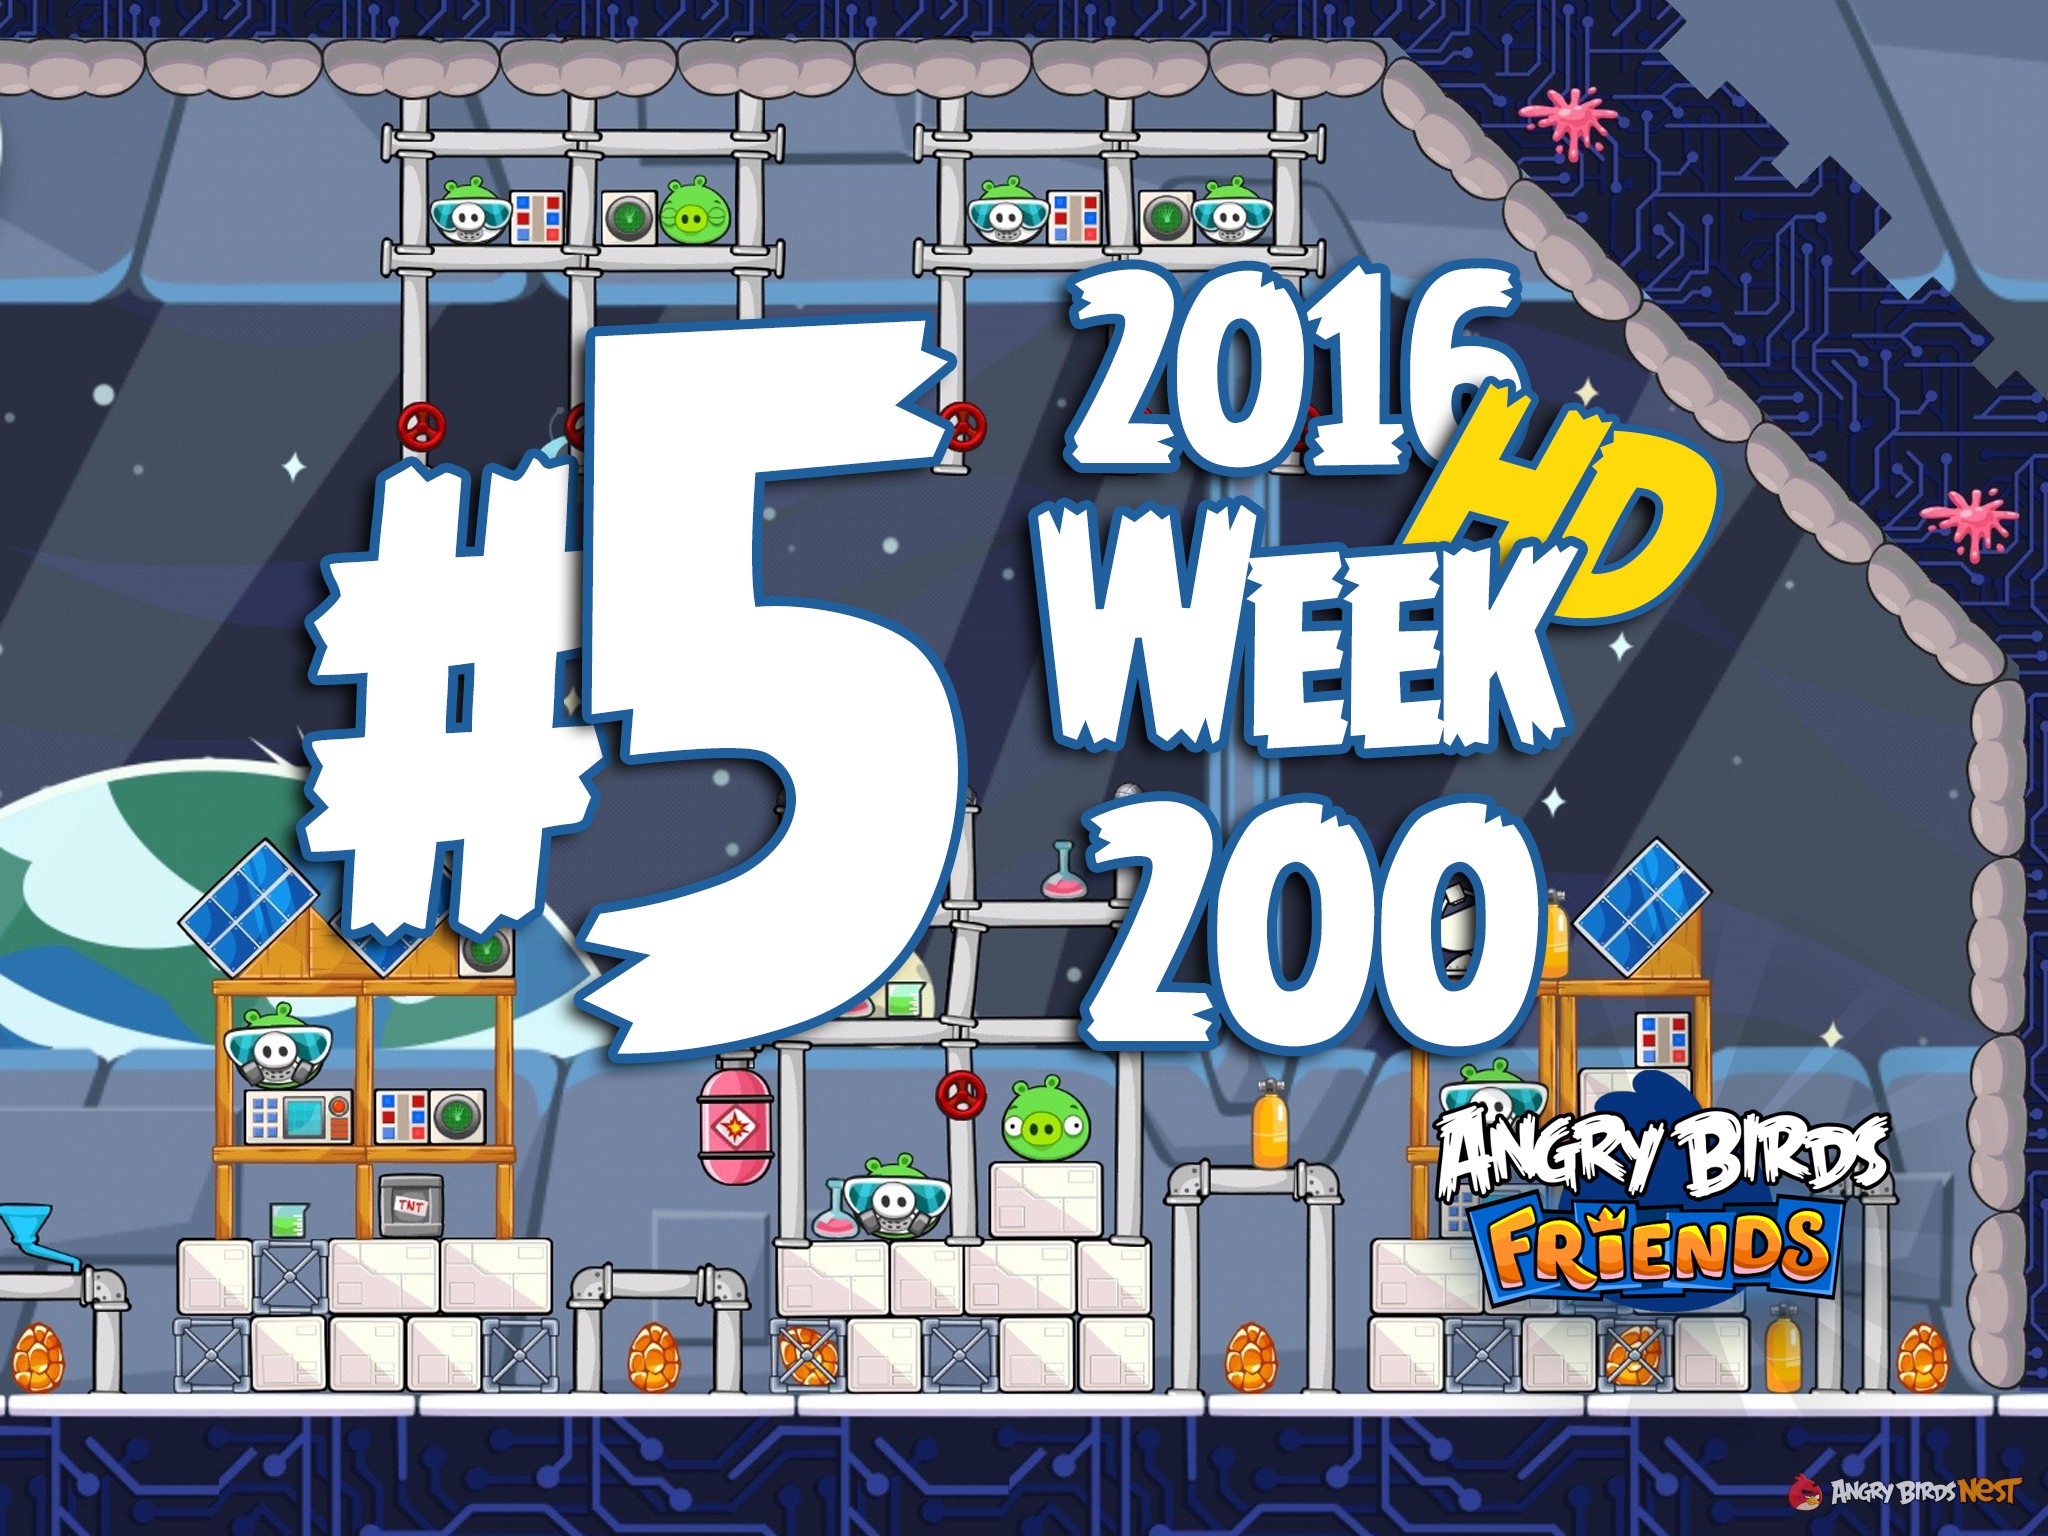 Angry Birds Friends Week 200 Level 5